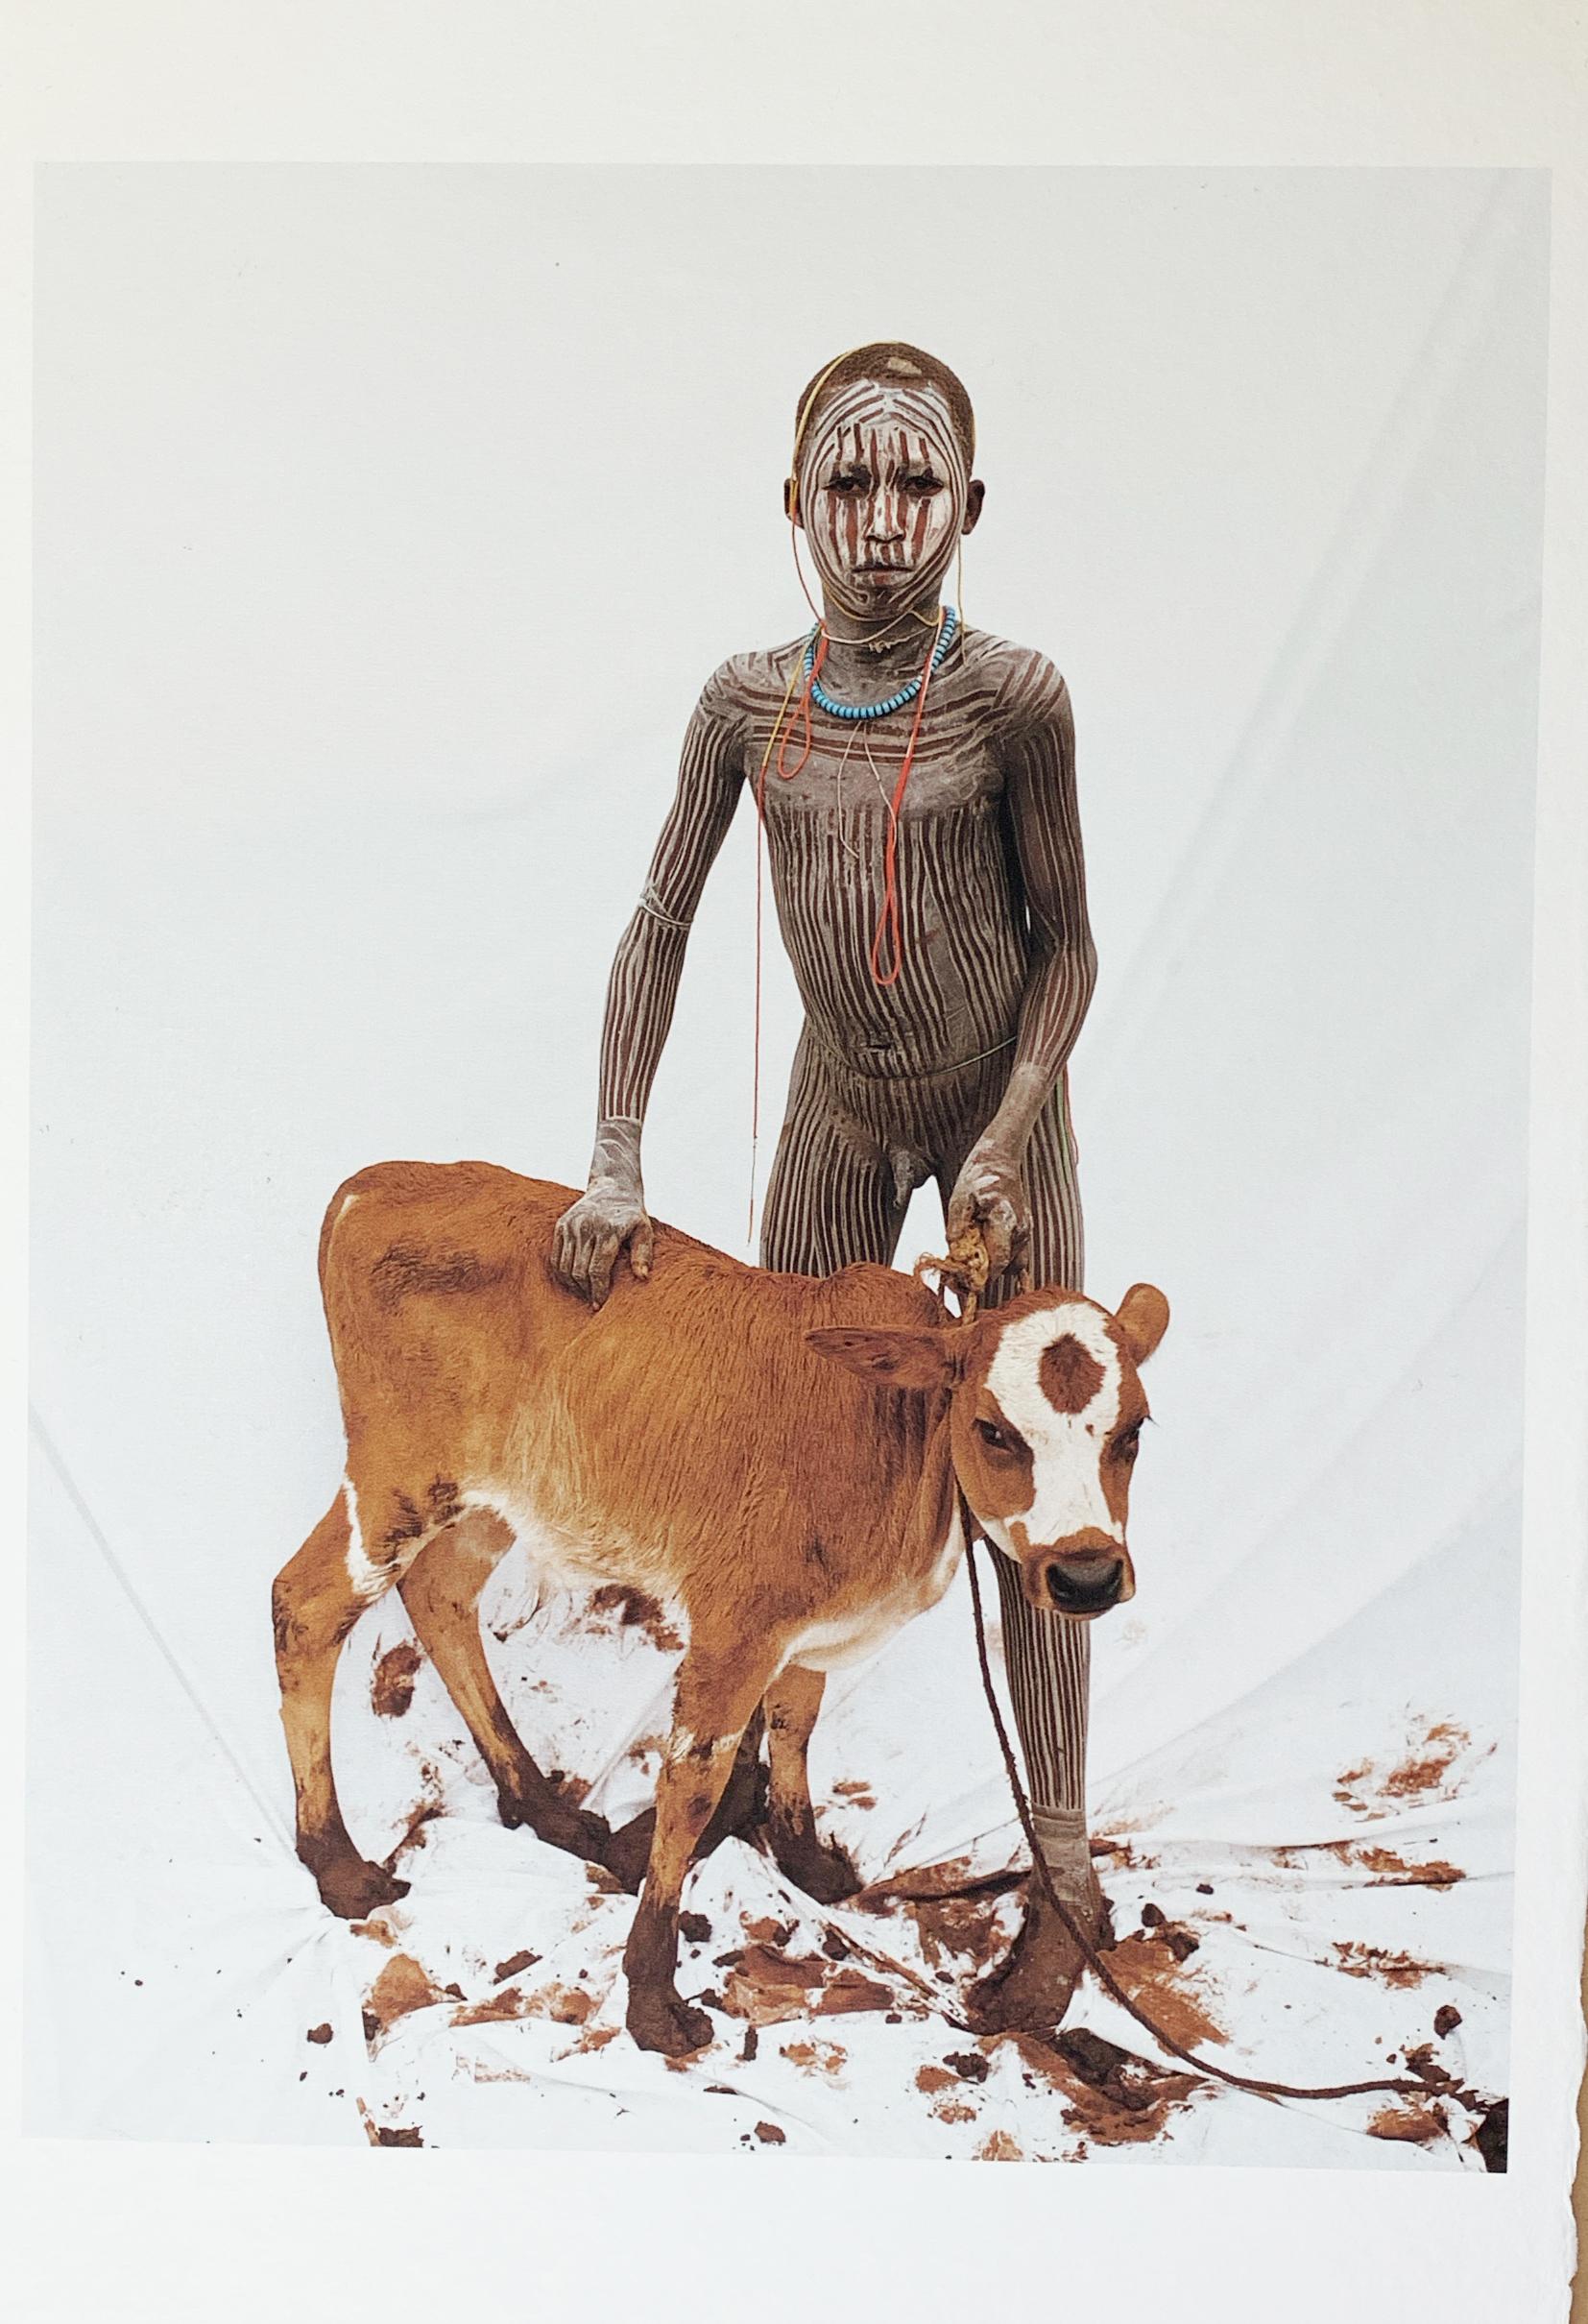 Jean-Michel Voge Color Photograph - Boy with Calf, Tribal Child in Ethiopia, Africa, Japanese Paper Limited Edition